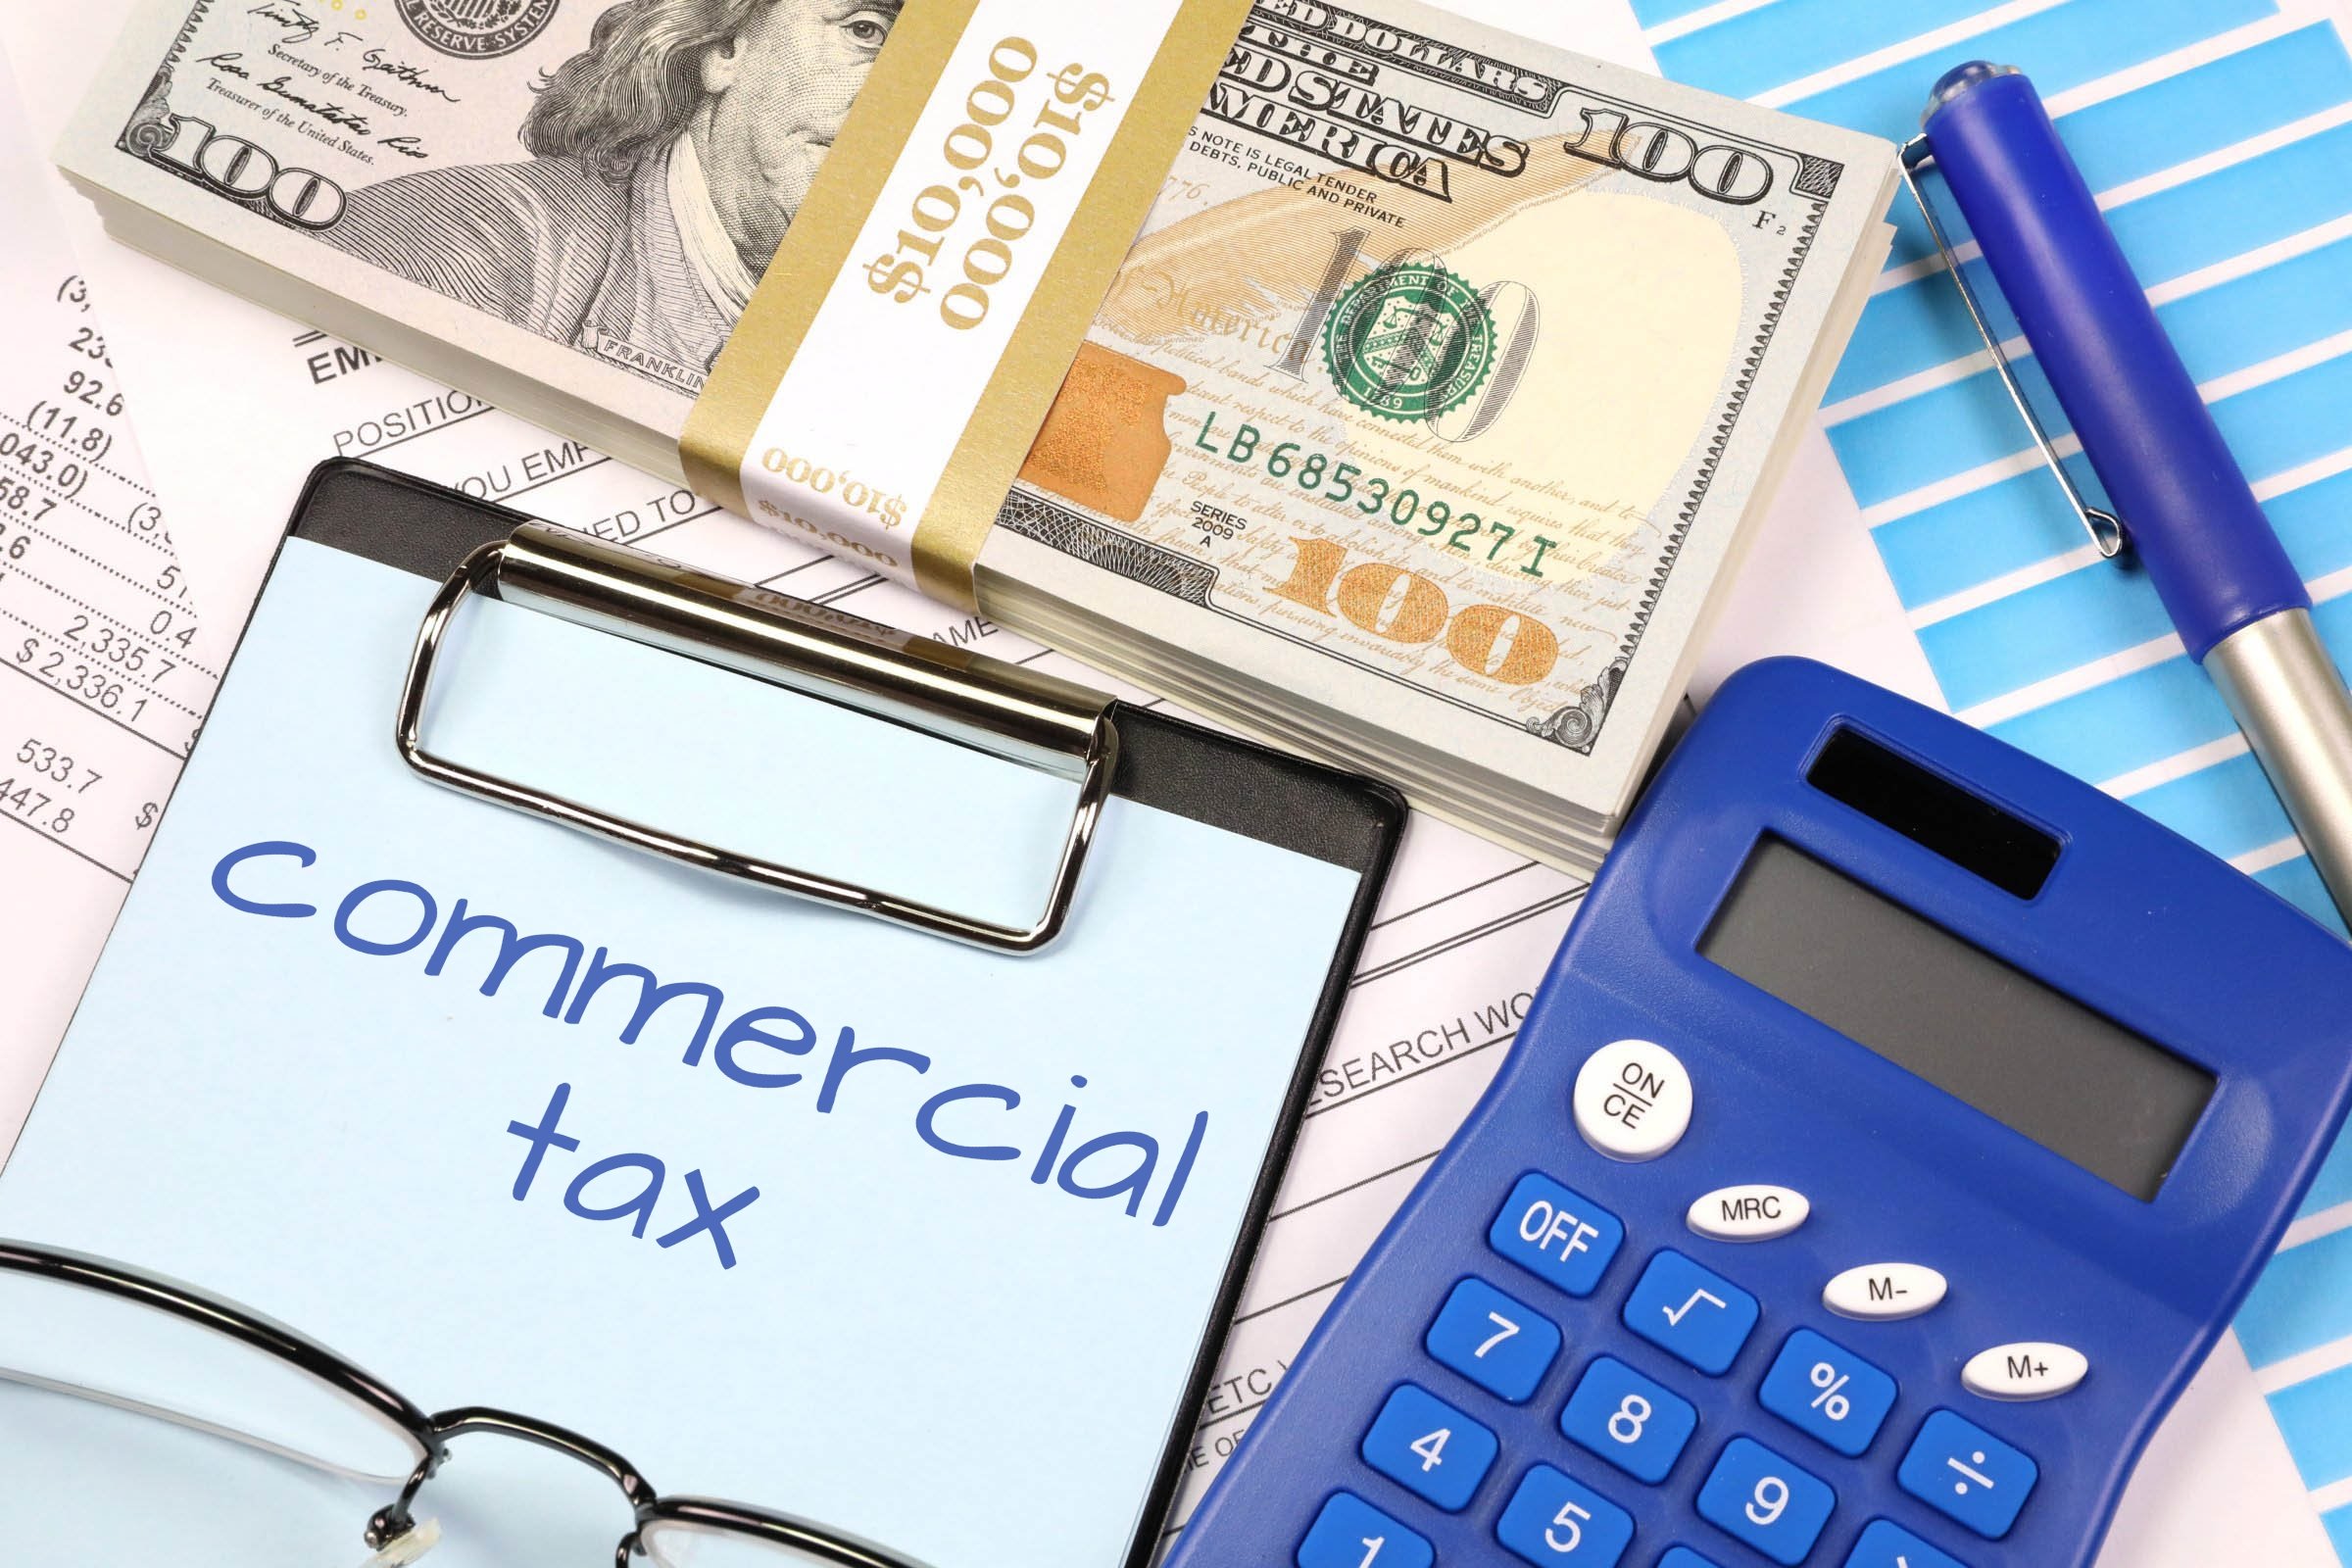 commercial tax